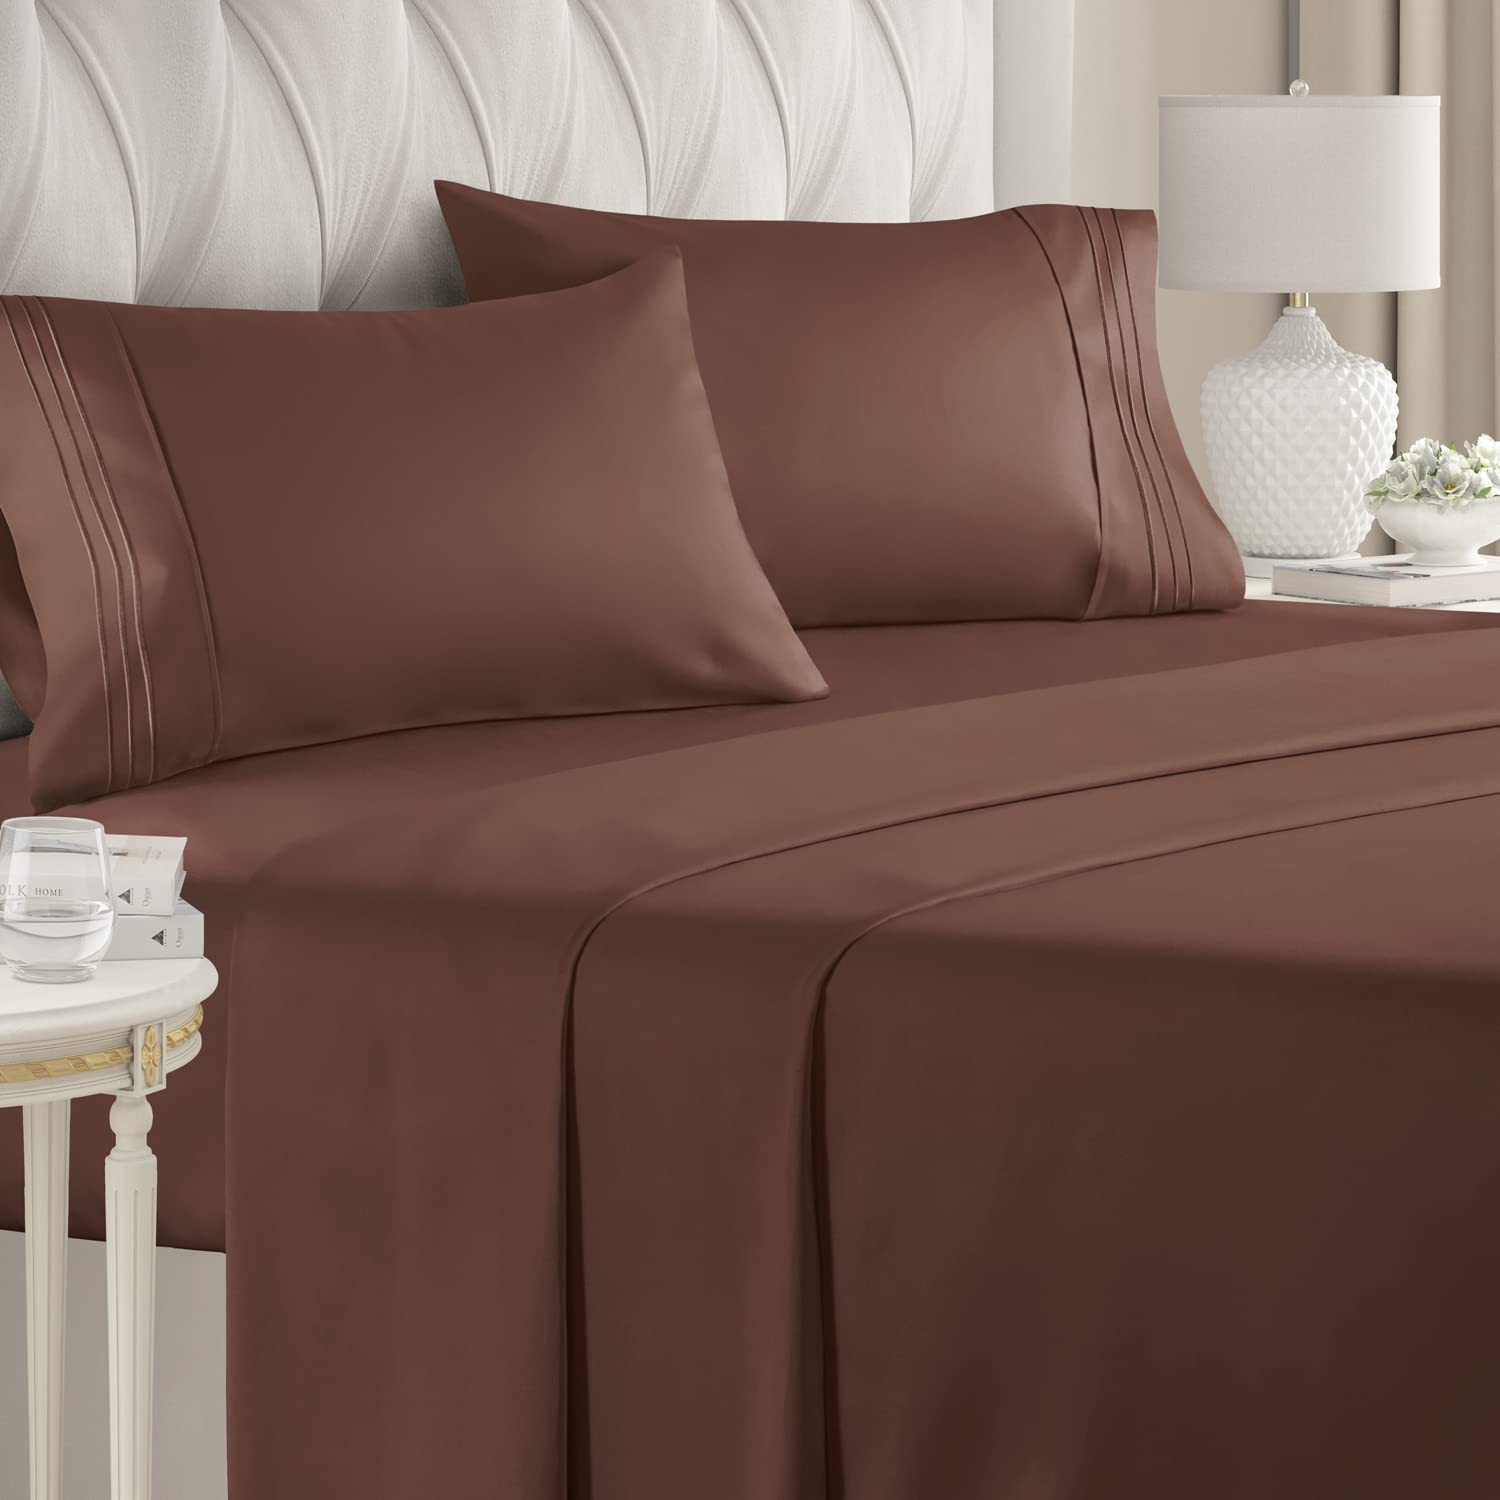 Buy 1000TC Solid Sheet Set Chocolate Egyptian Cotton at Egyptianhomelinens.com